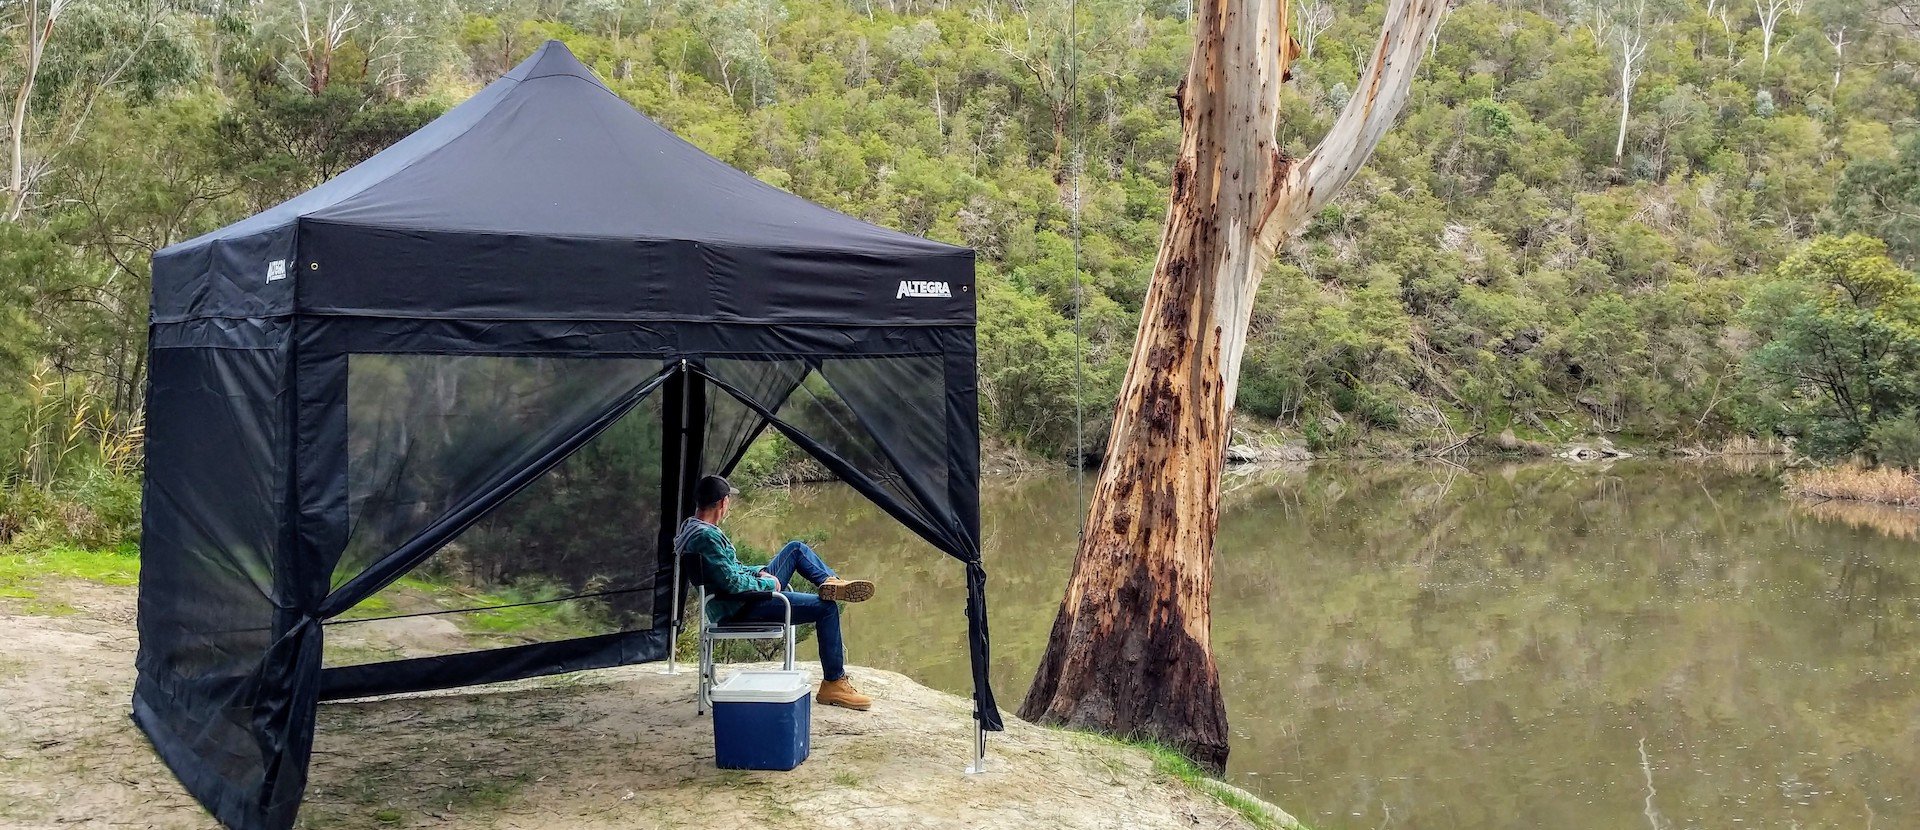 Gazebo Mesh Walls for your Altegra - keep the bugs out with fine fly screen walls that easily attach to your gazebo or marquee. 3x3m black Altegra gazebo with full mesh wallkit attached, next to Melbourne's Yarra river.